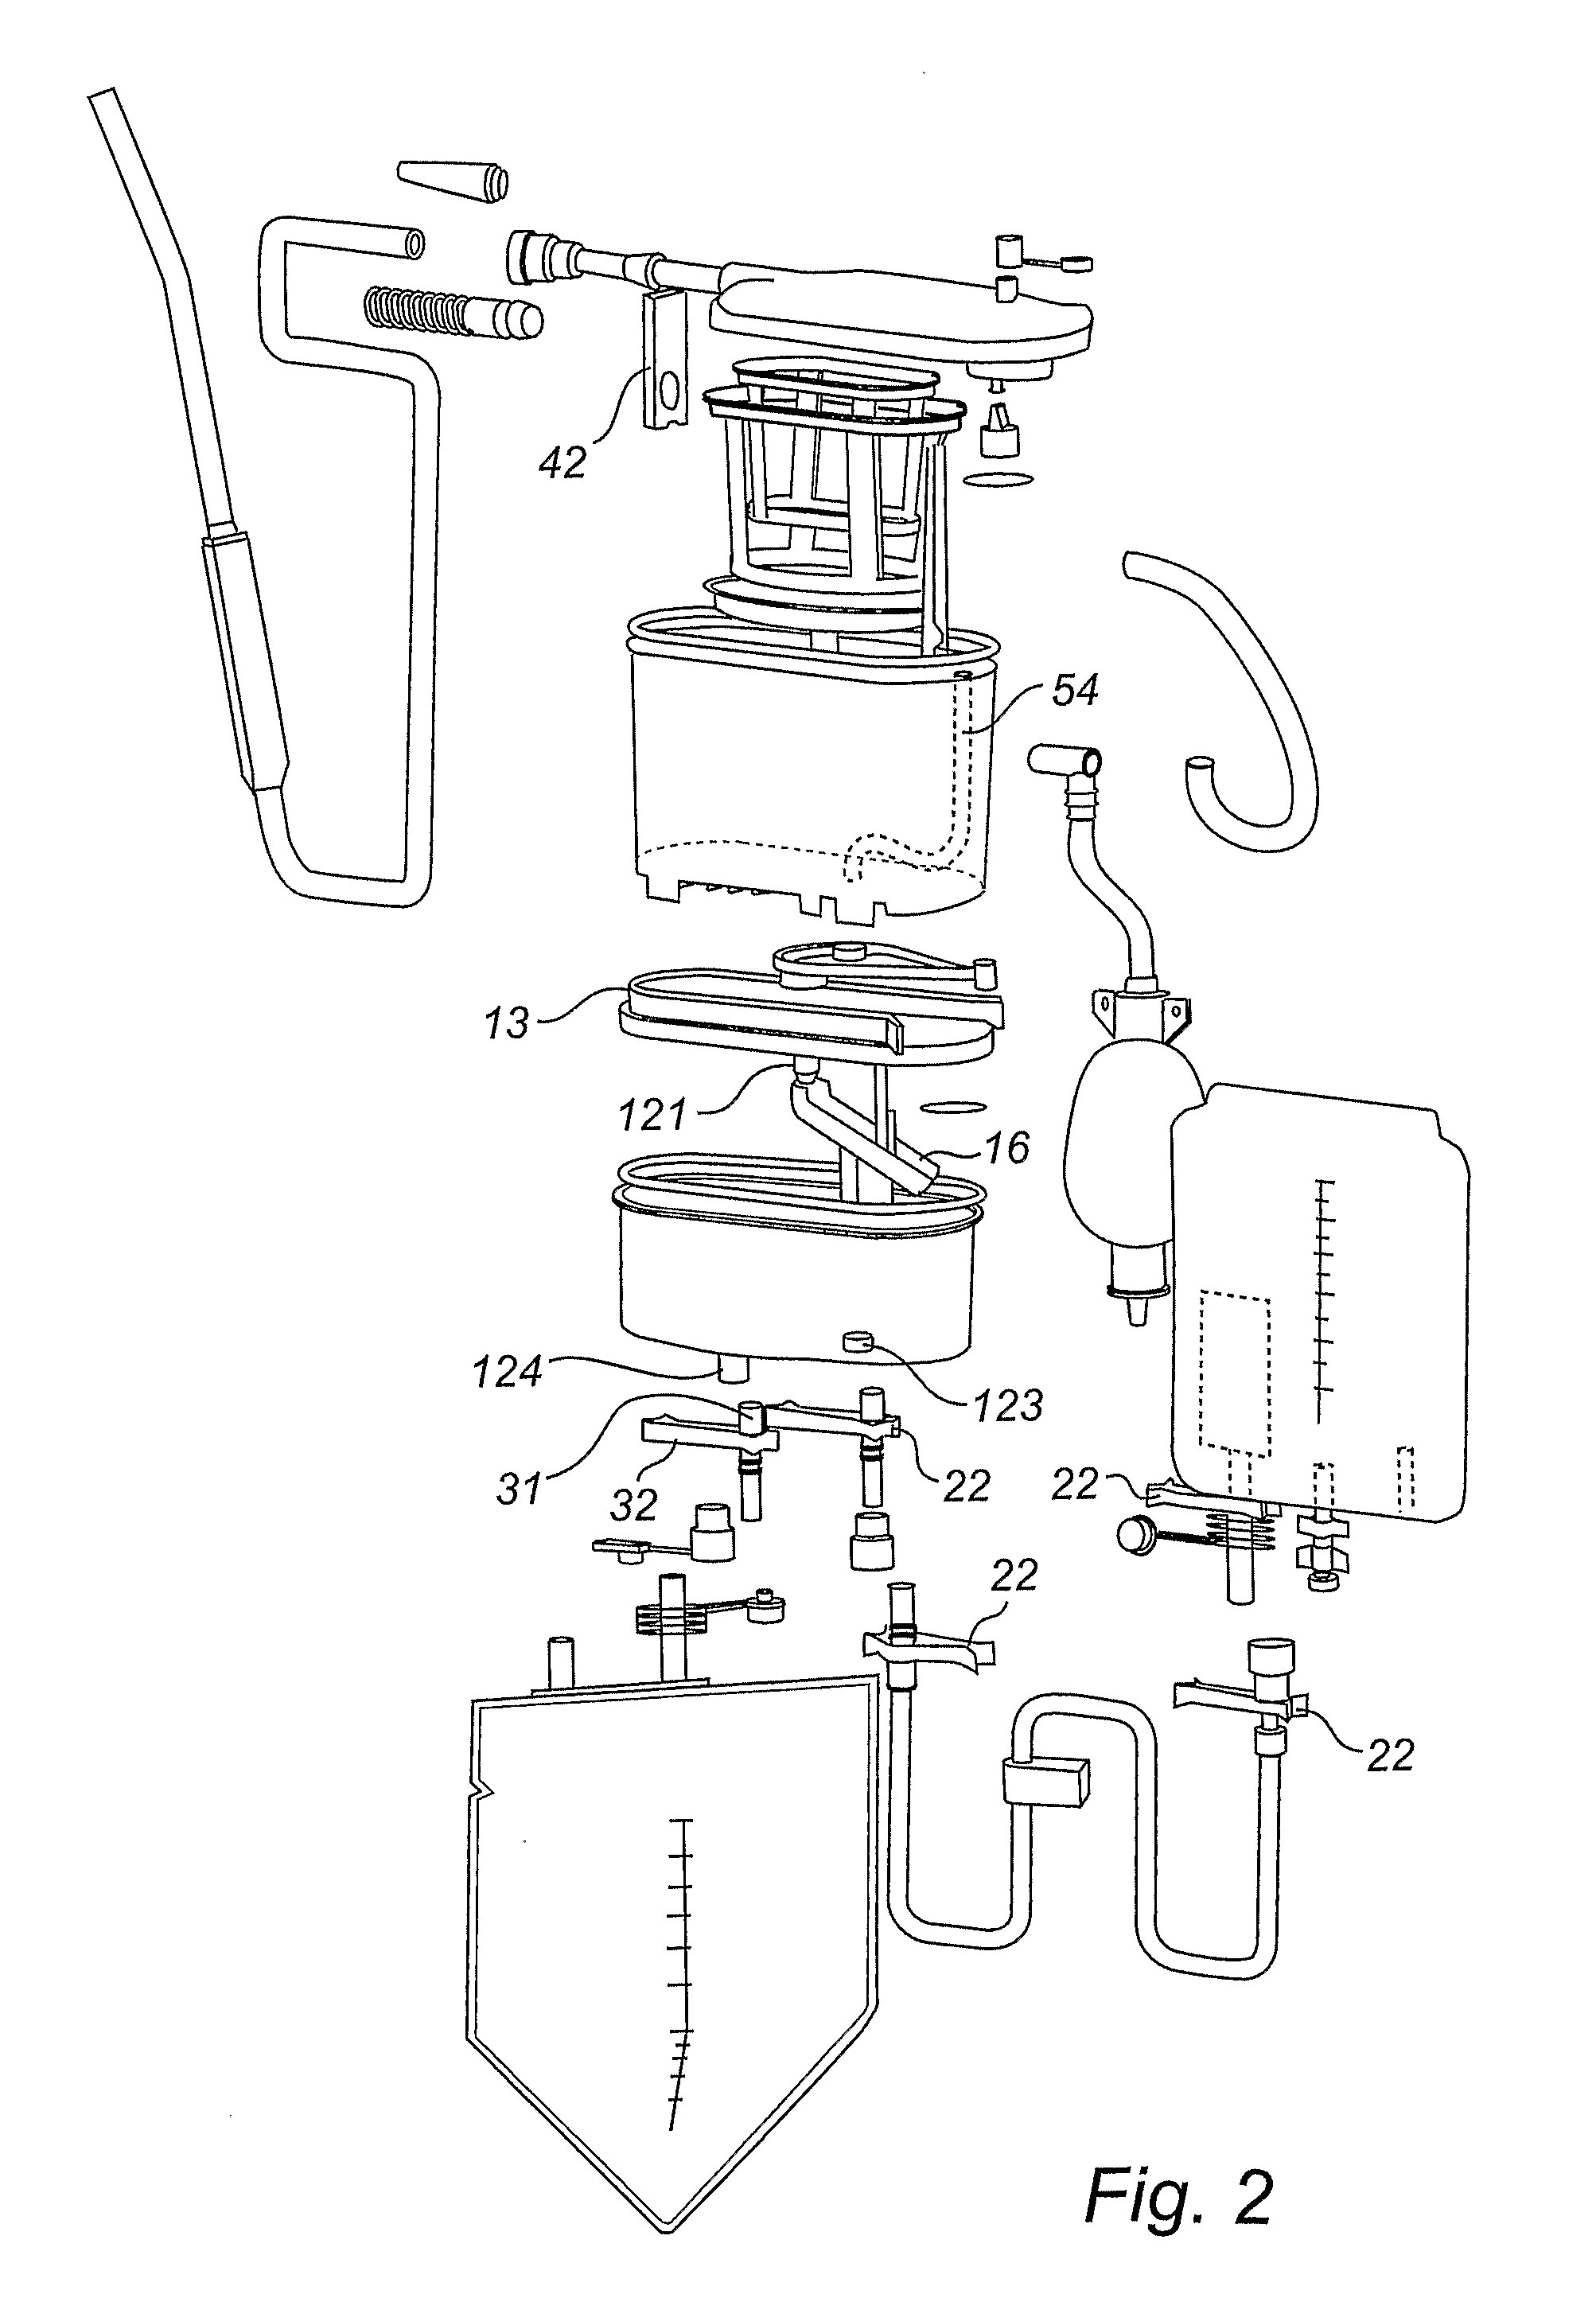 Method and Apparatus For Autotransfusion